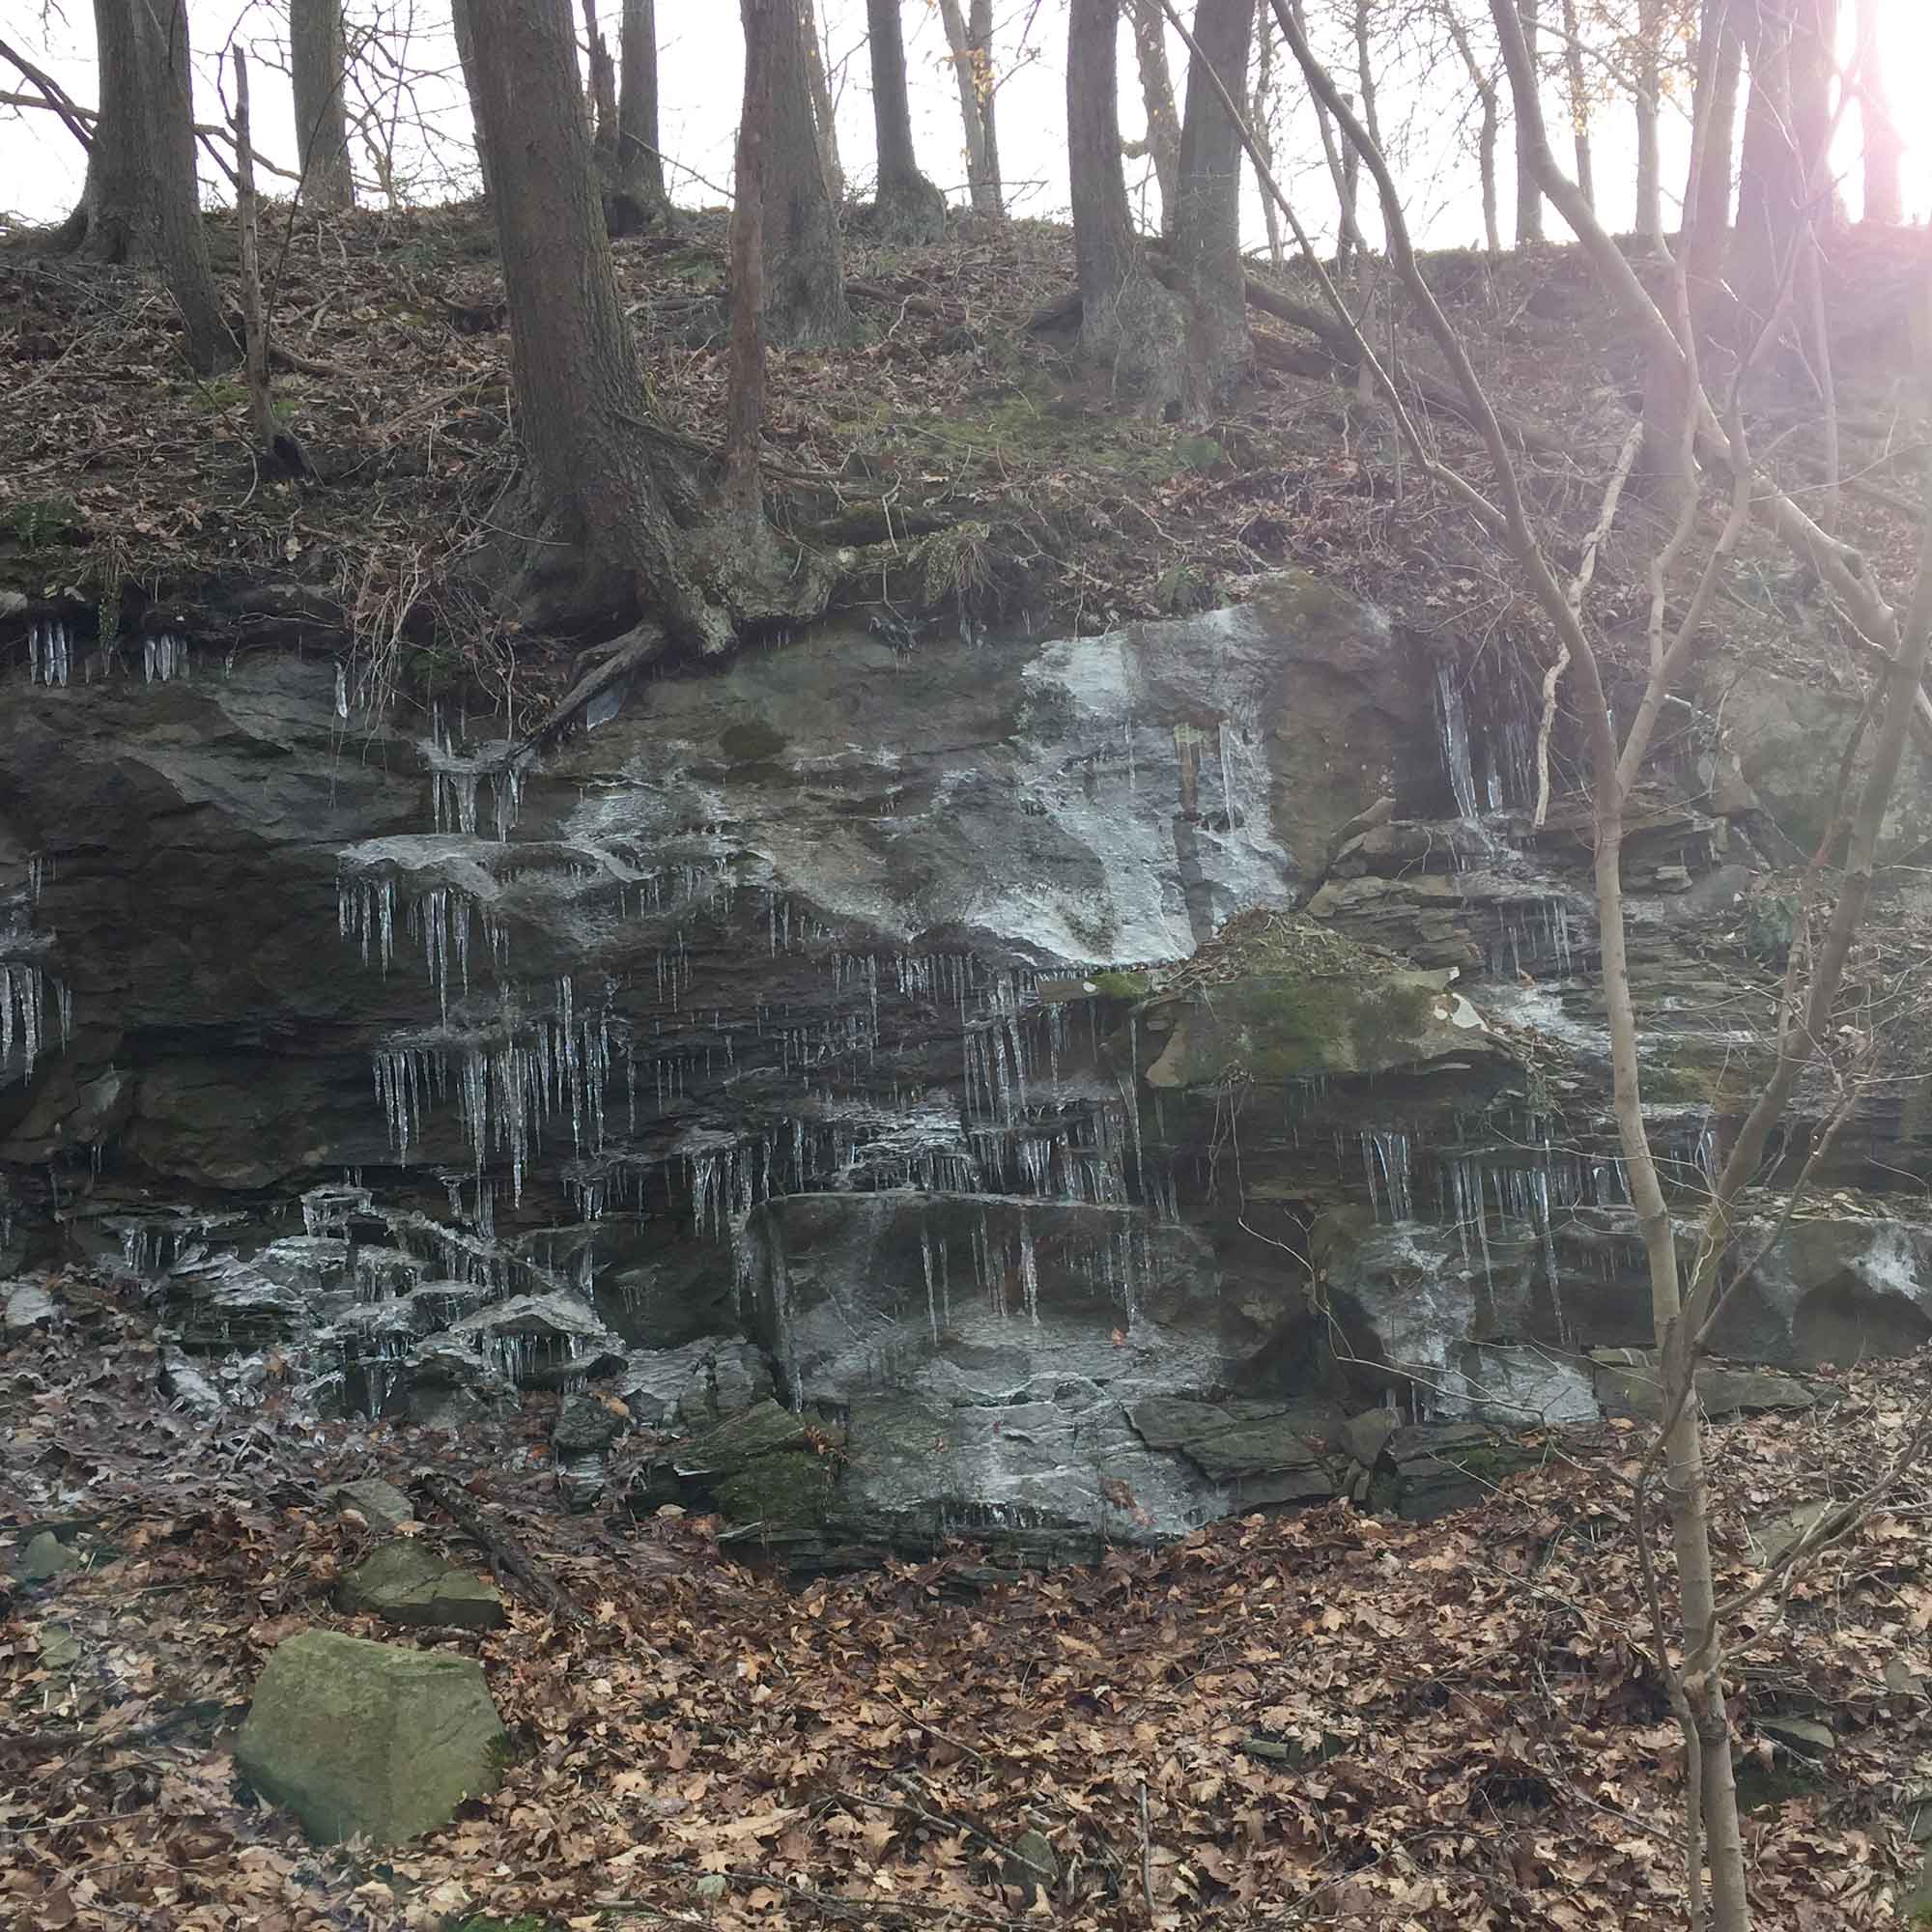 Photograph of a rock outcrop in Ohio that shows erosion as a result of both freezing-thawing and plant roots.